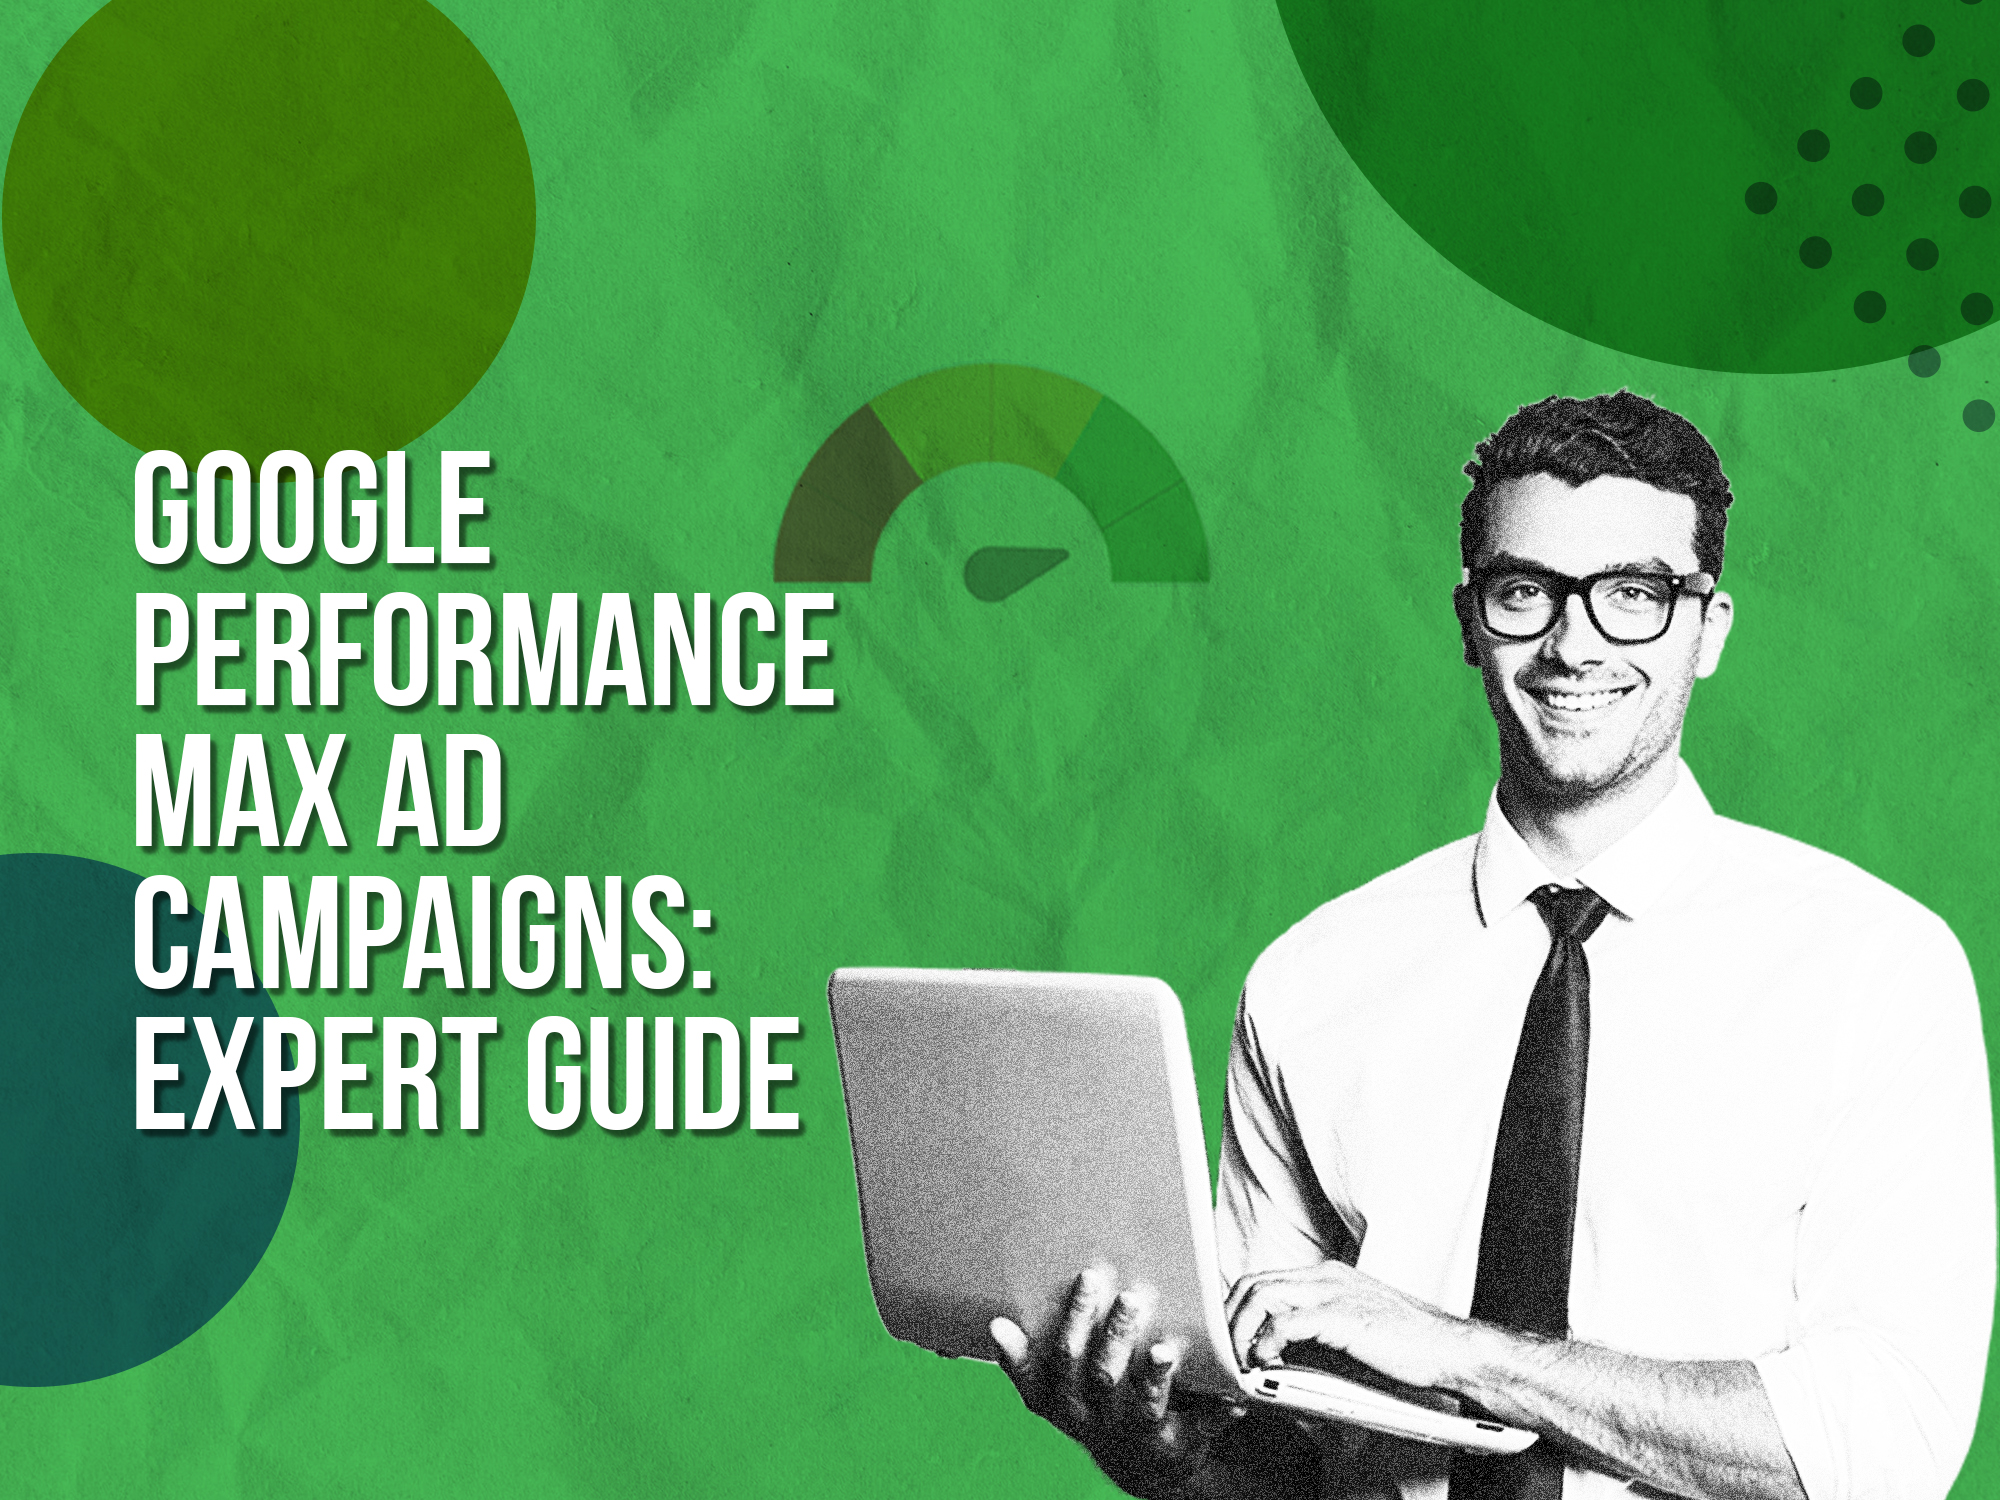 Google Performance Max Ad Campaigns: Expert Guide